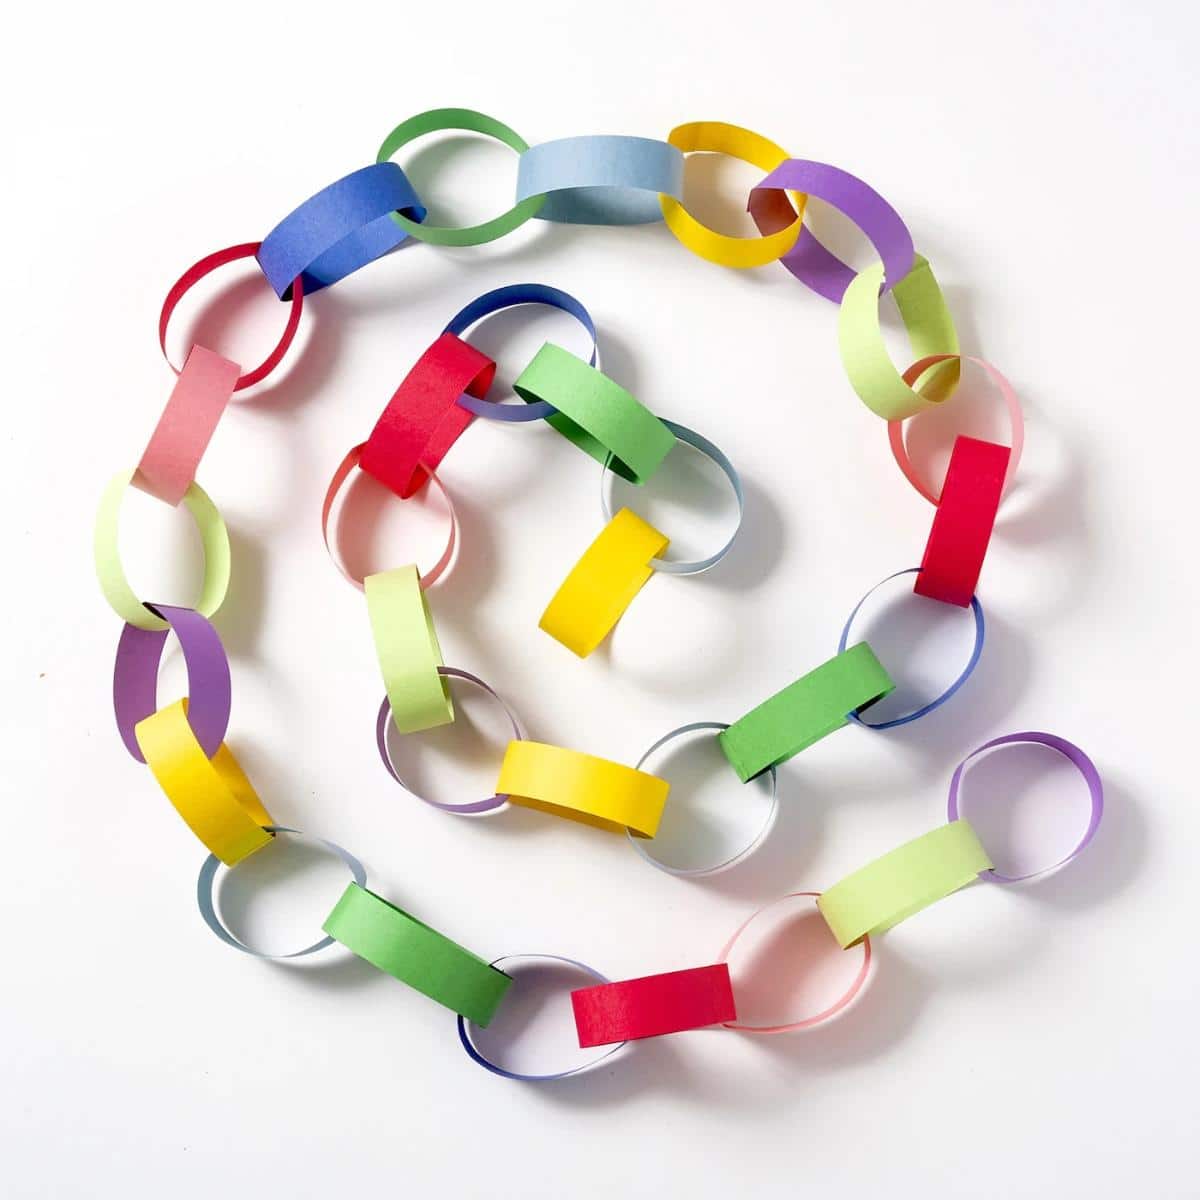 Paper Chain Made in Four Simple Steps